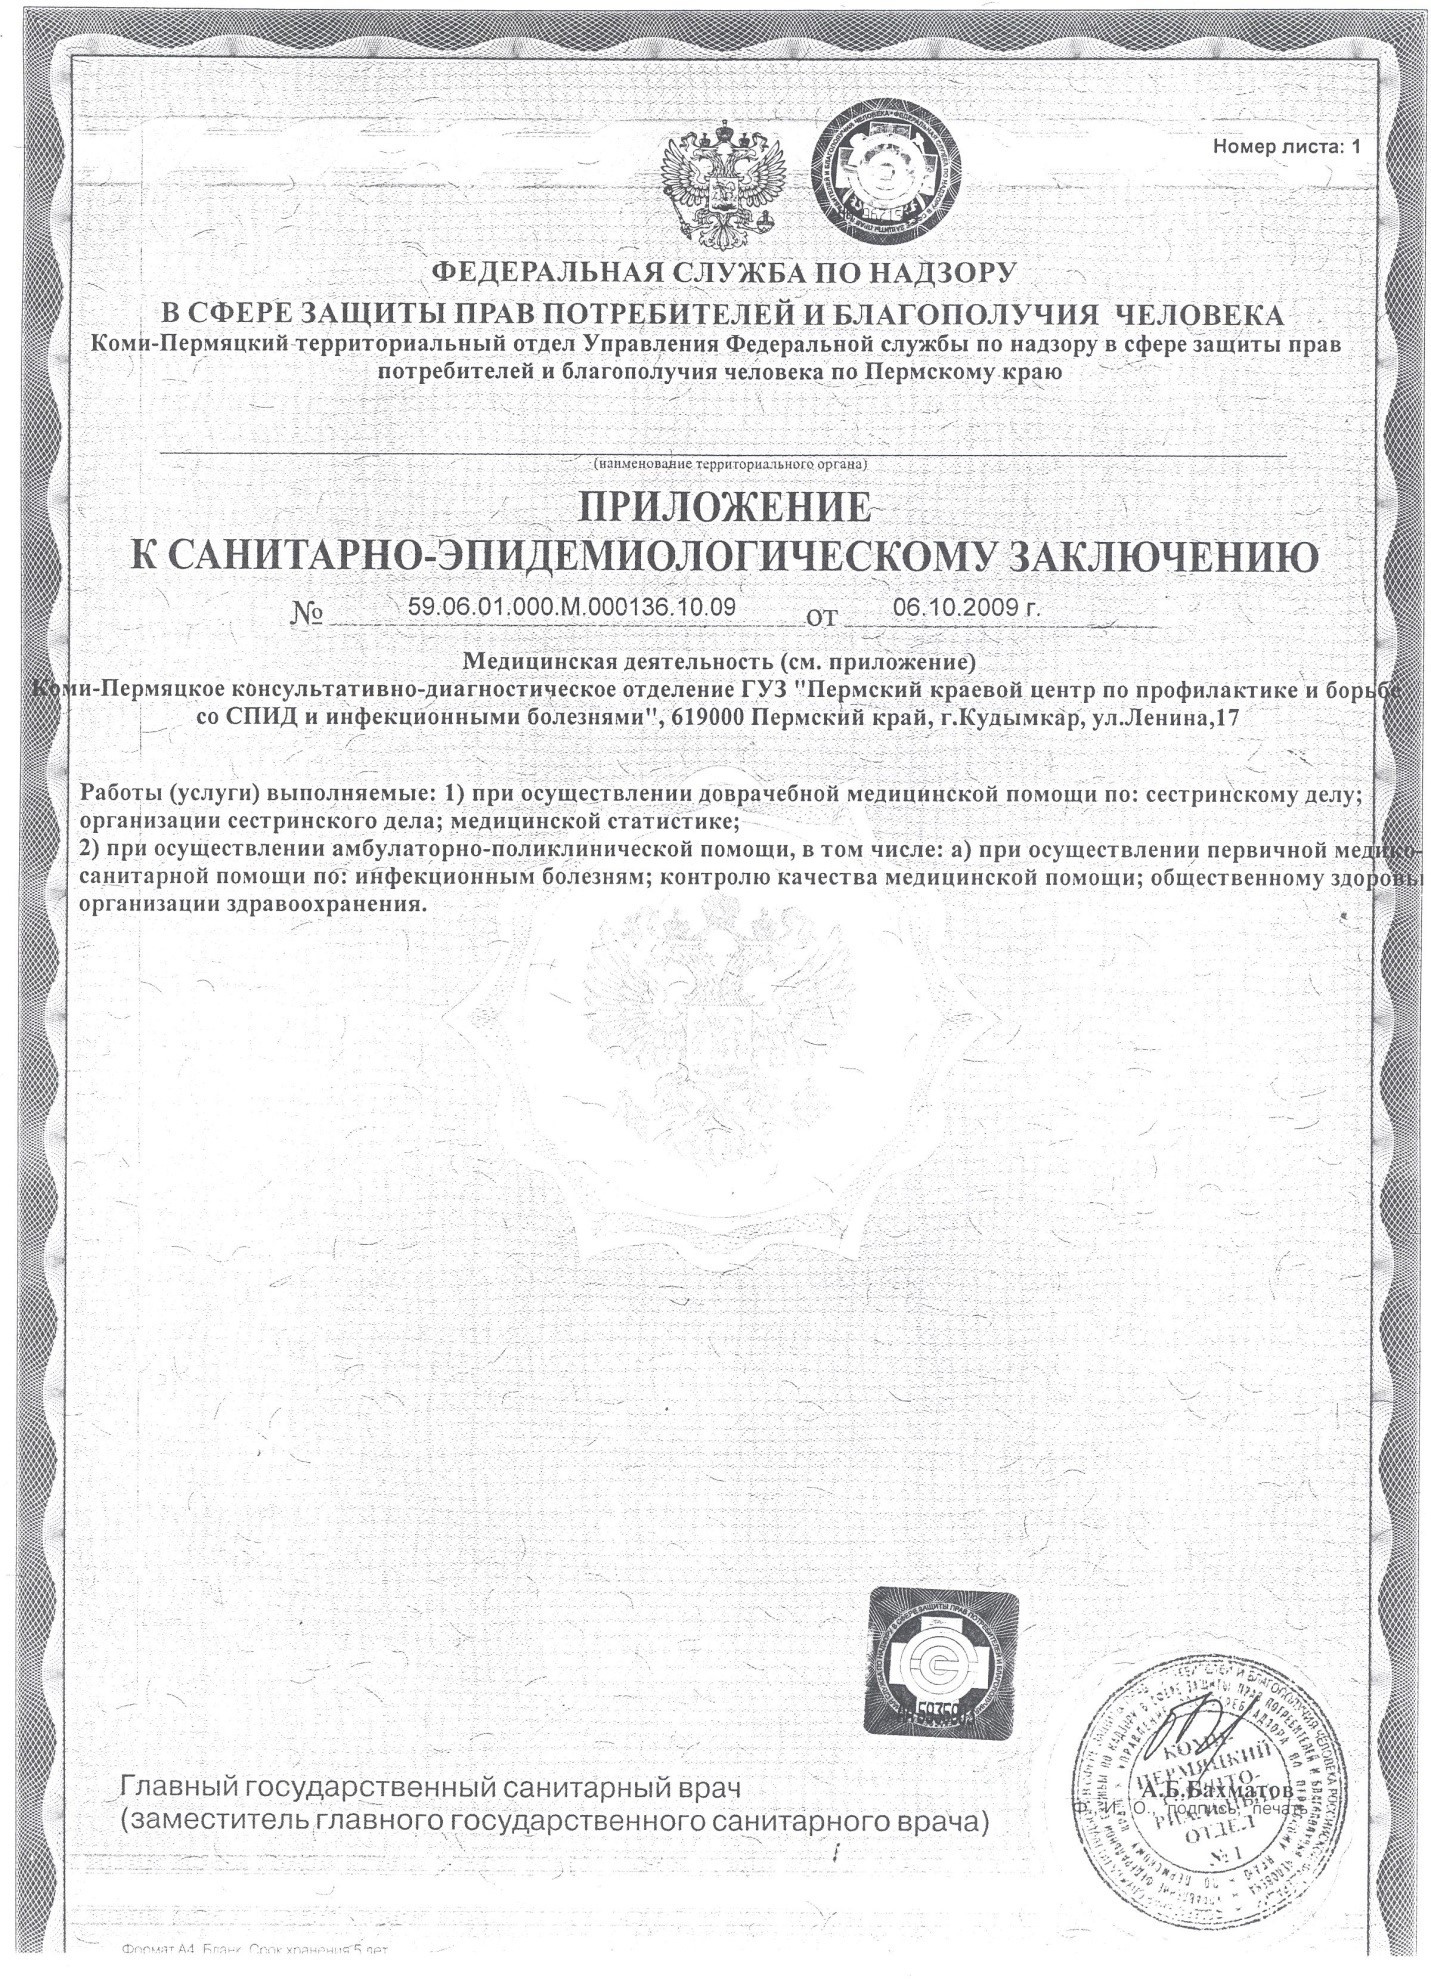 Sanitary-epidemiological certificate11